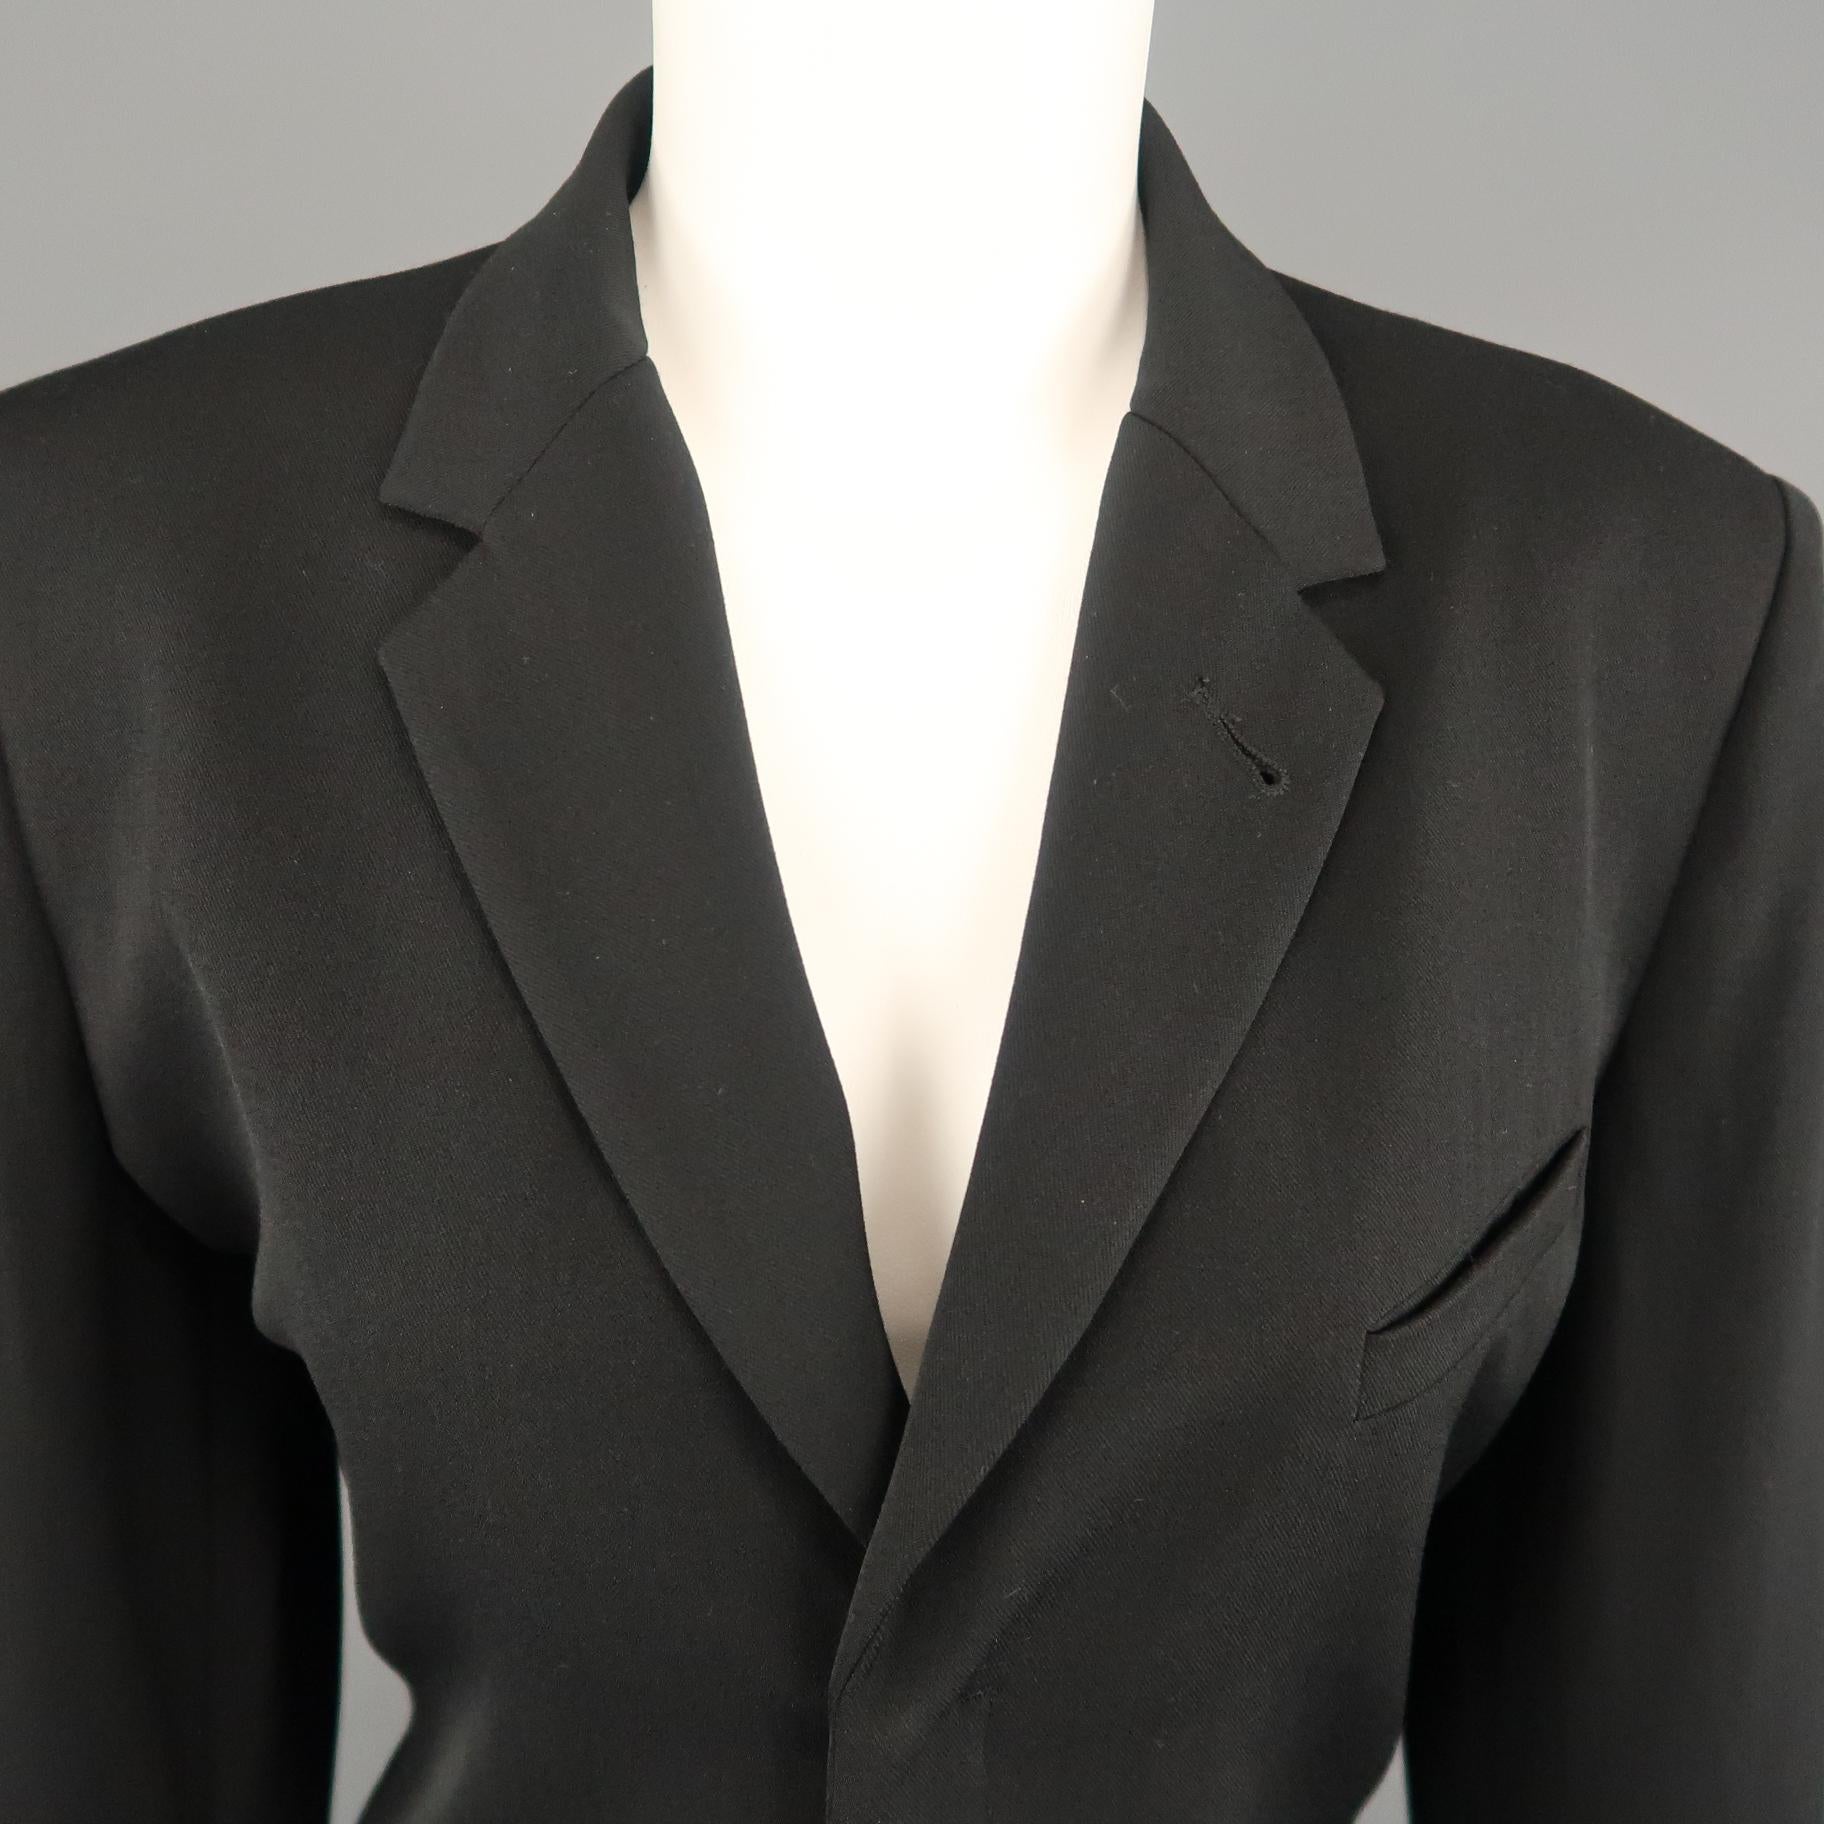 Vintage JEAN PAUL GAULTIER blazer comes in black twill with a notch lapel, hidden placket zip front, and distressed leather belted zip off cuffs. Made in Italy.
 
Excellent Pre-Owned Condition.
Marked: 12
 
Measurements:
 
Shoulder: 16 in.
Bust: 42